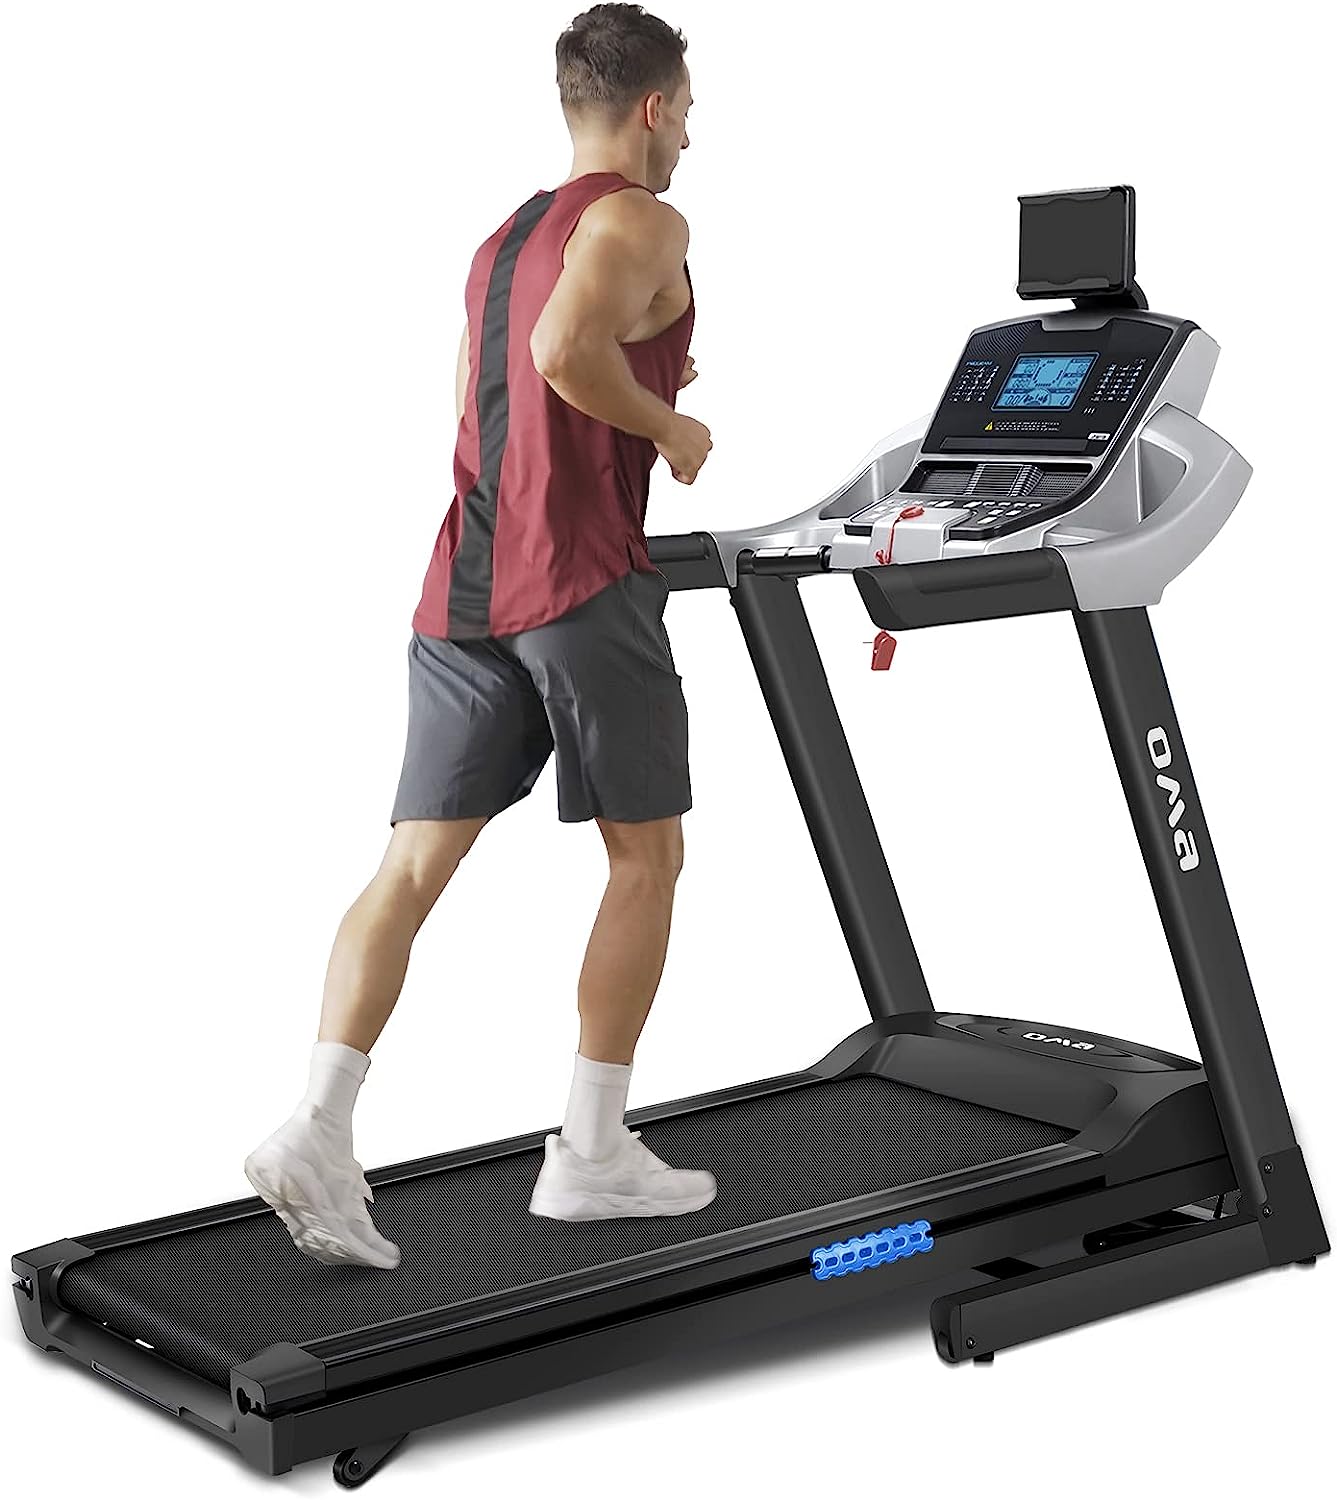 OMA Treadmills for Home, Folding Treadmill with 15% Auto Incline (Some Scratches) - $650